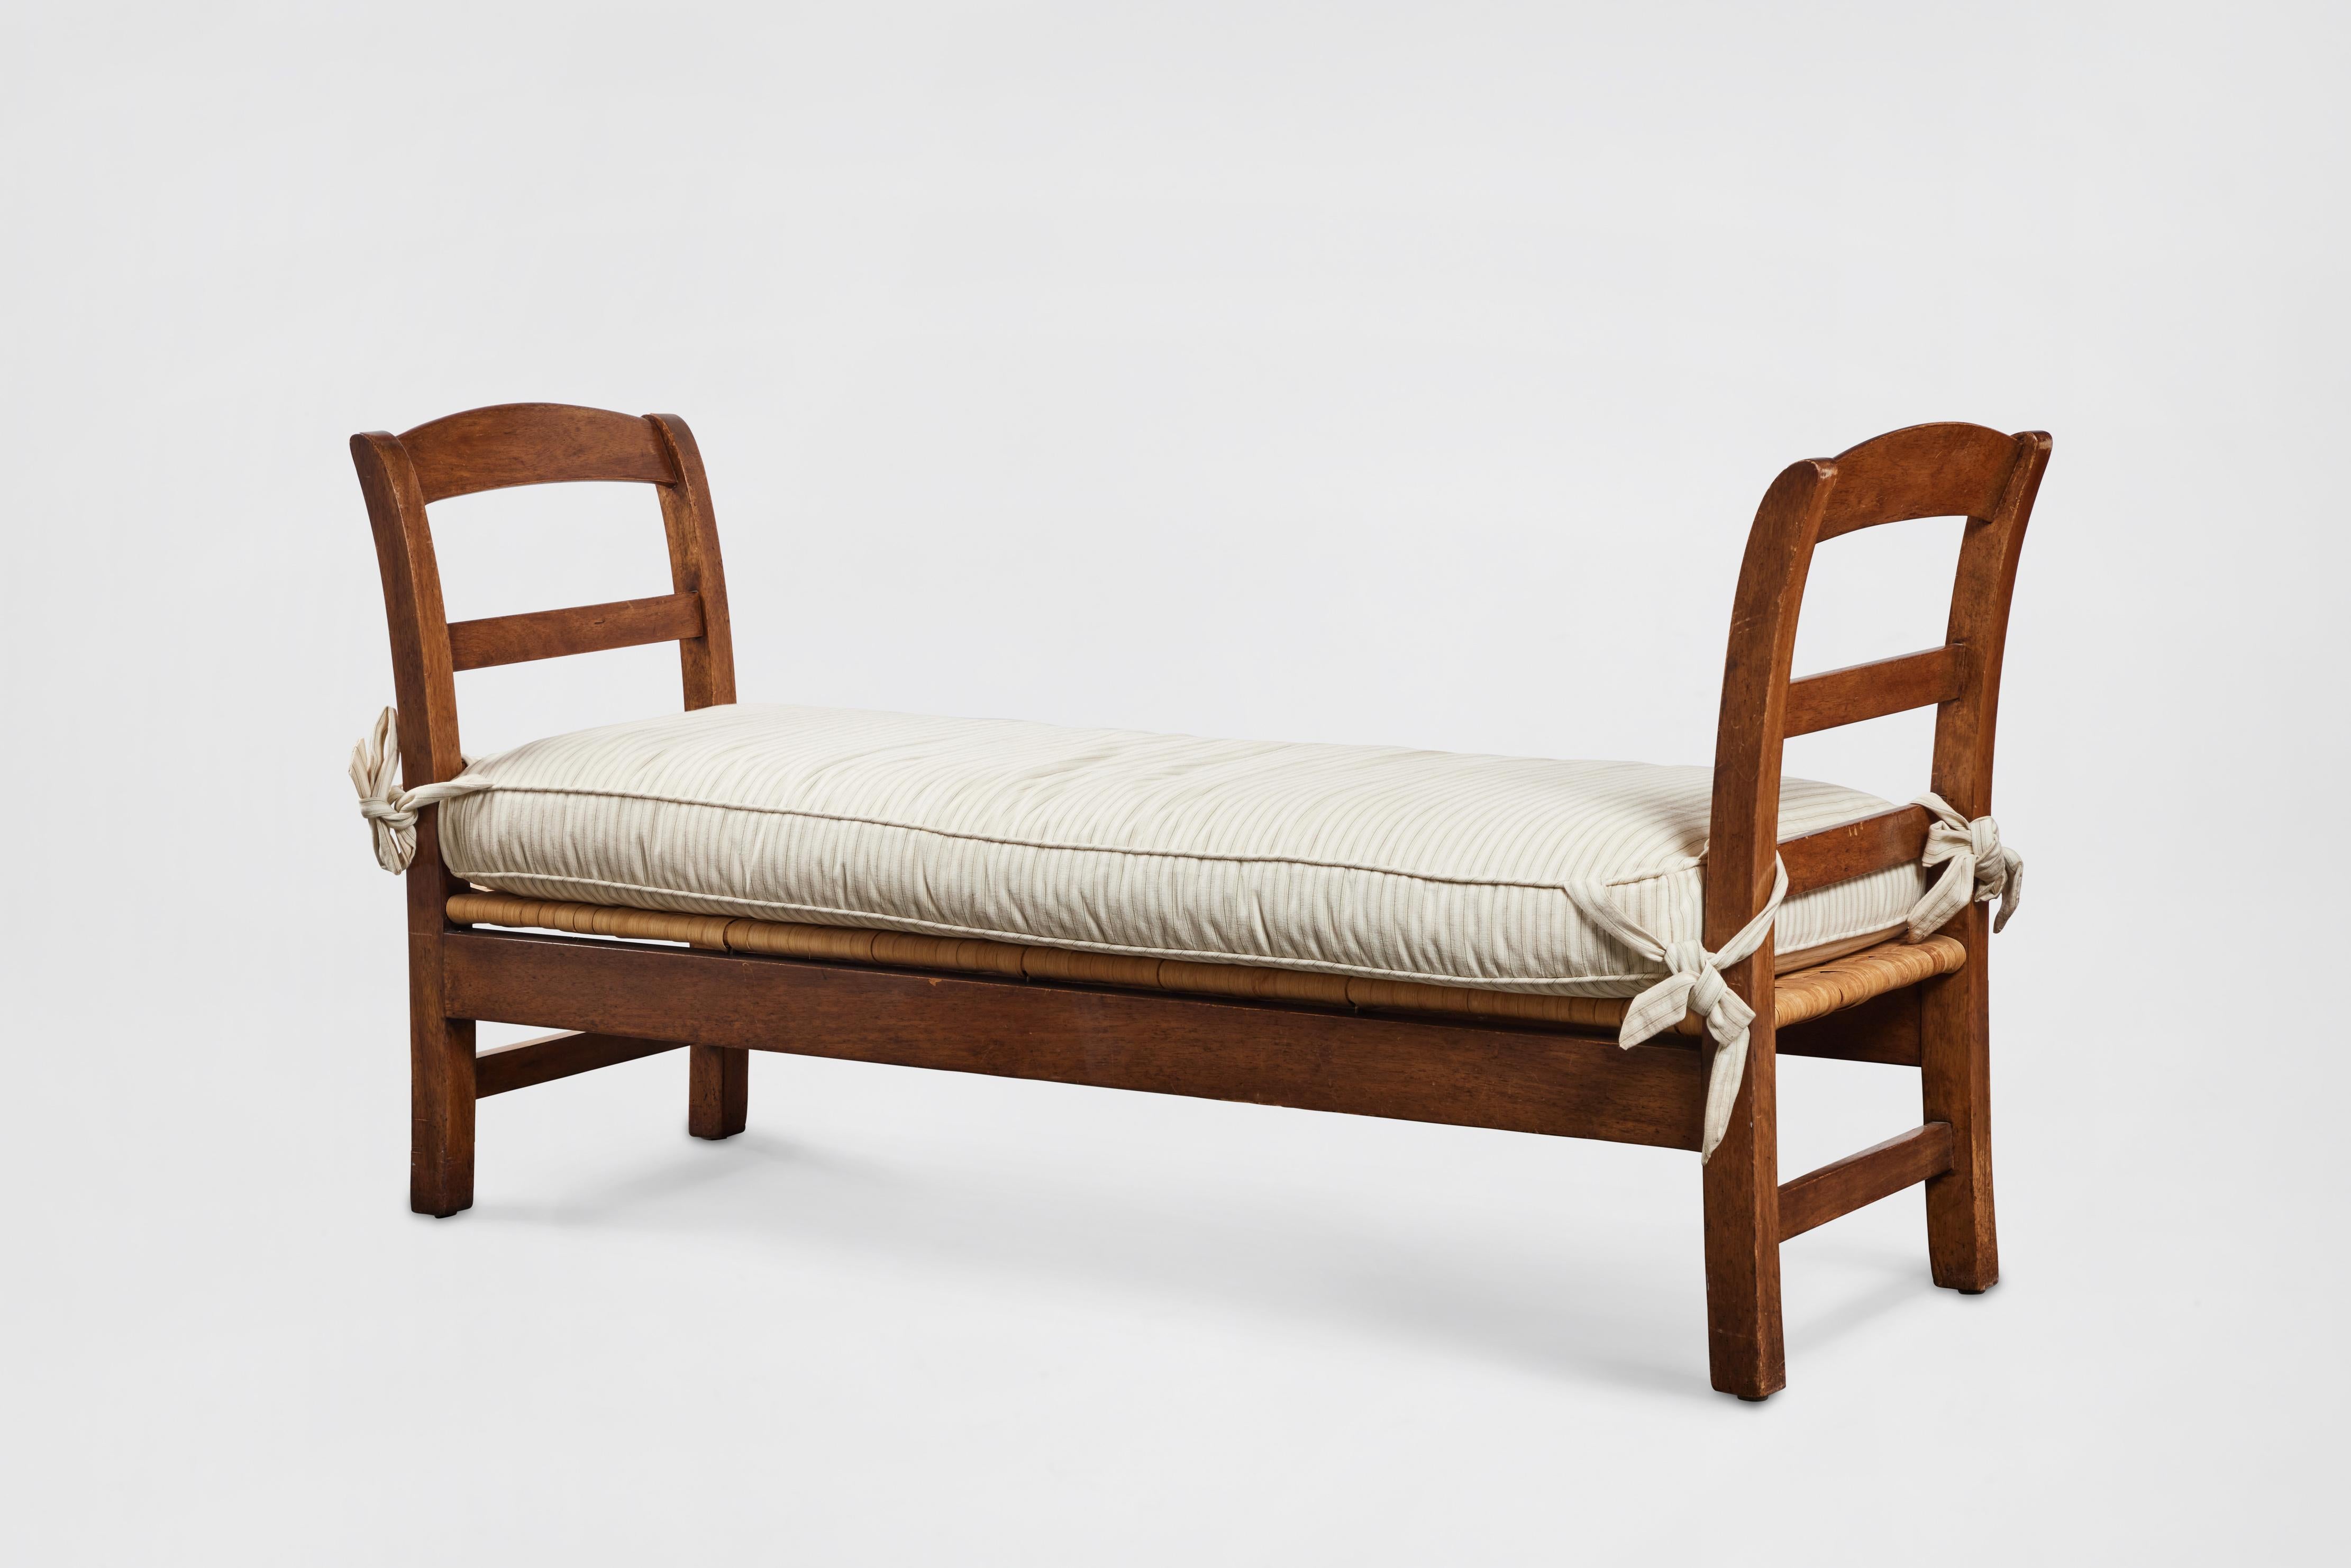 French Provincial style mahogany bench or daybed with striped ivory/beige linen cushion and wicker seat base. Cushion has ties to secure it in place. Made in 1995 by John Hall Designs, Los Angeles

Additional Dimensions: 
Seat Height 13